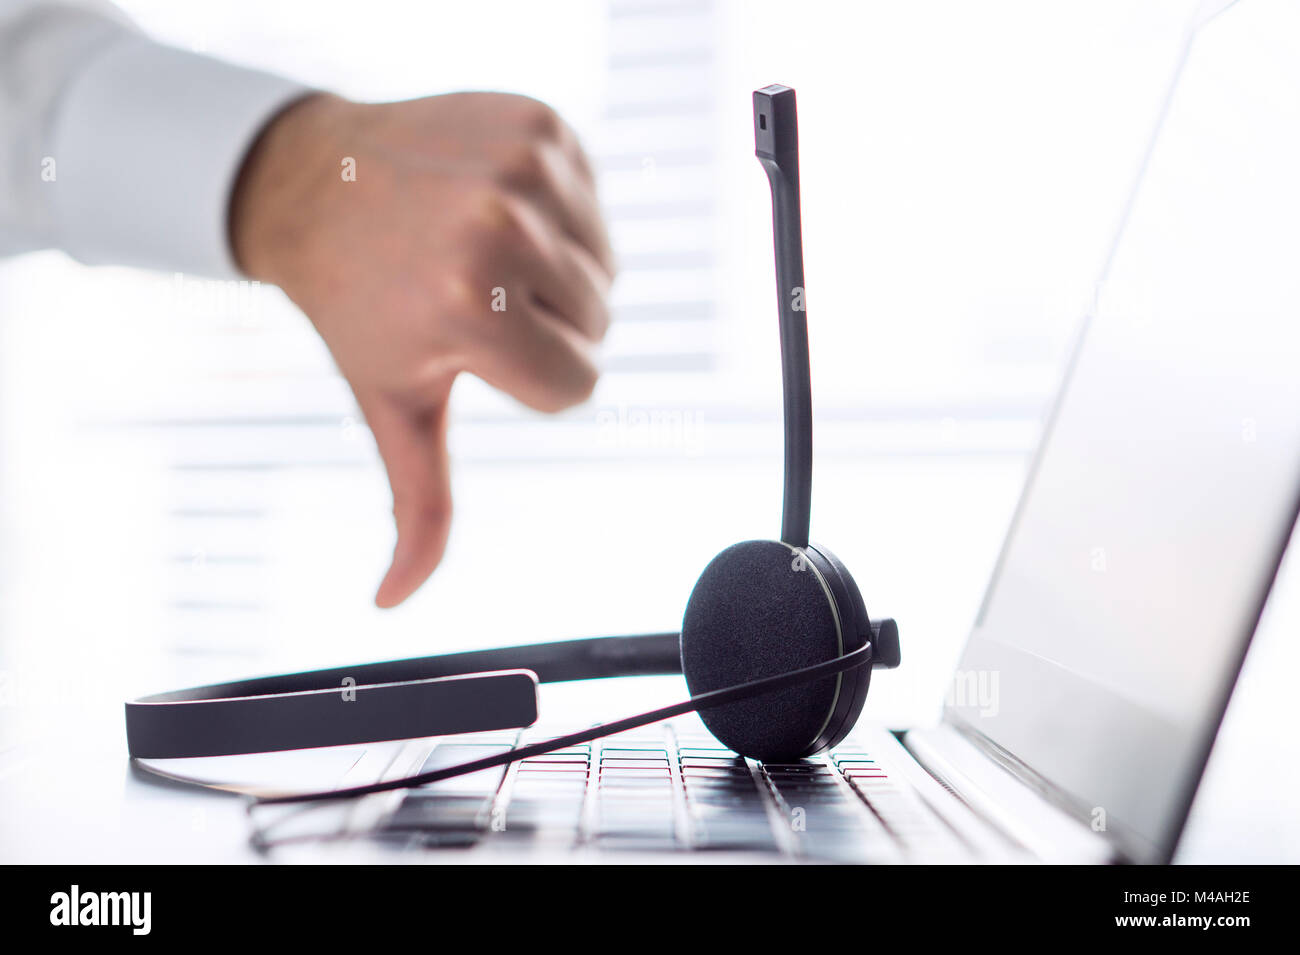 Unhappy help desk, support hotline or call center person showing thumbs down. Tele marketing professional having horrible day, not satisfied. Stock Photo